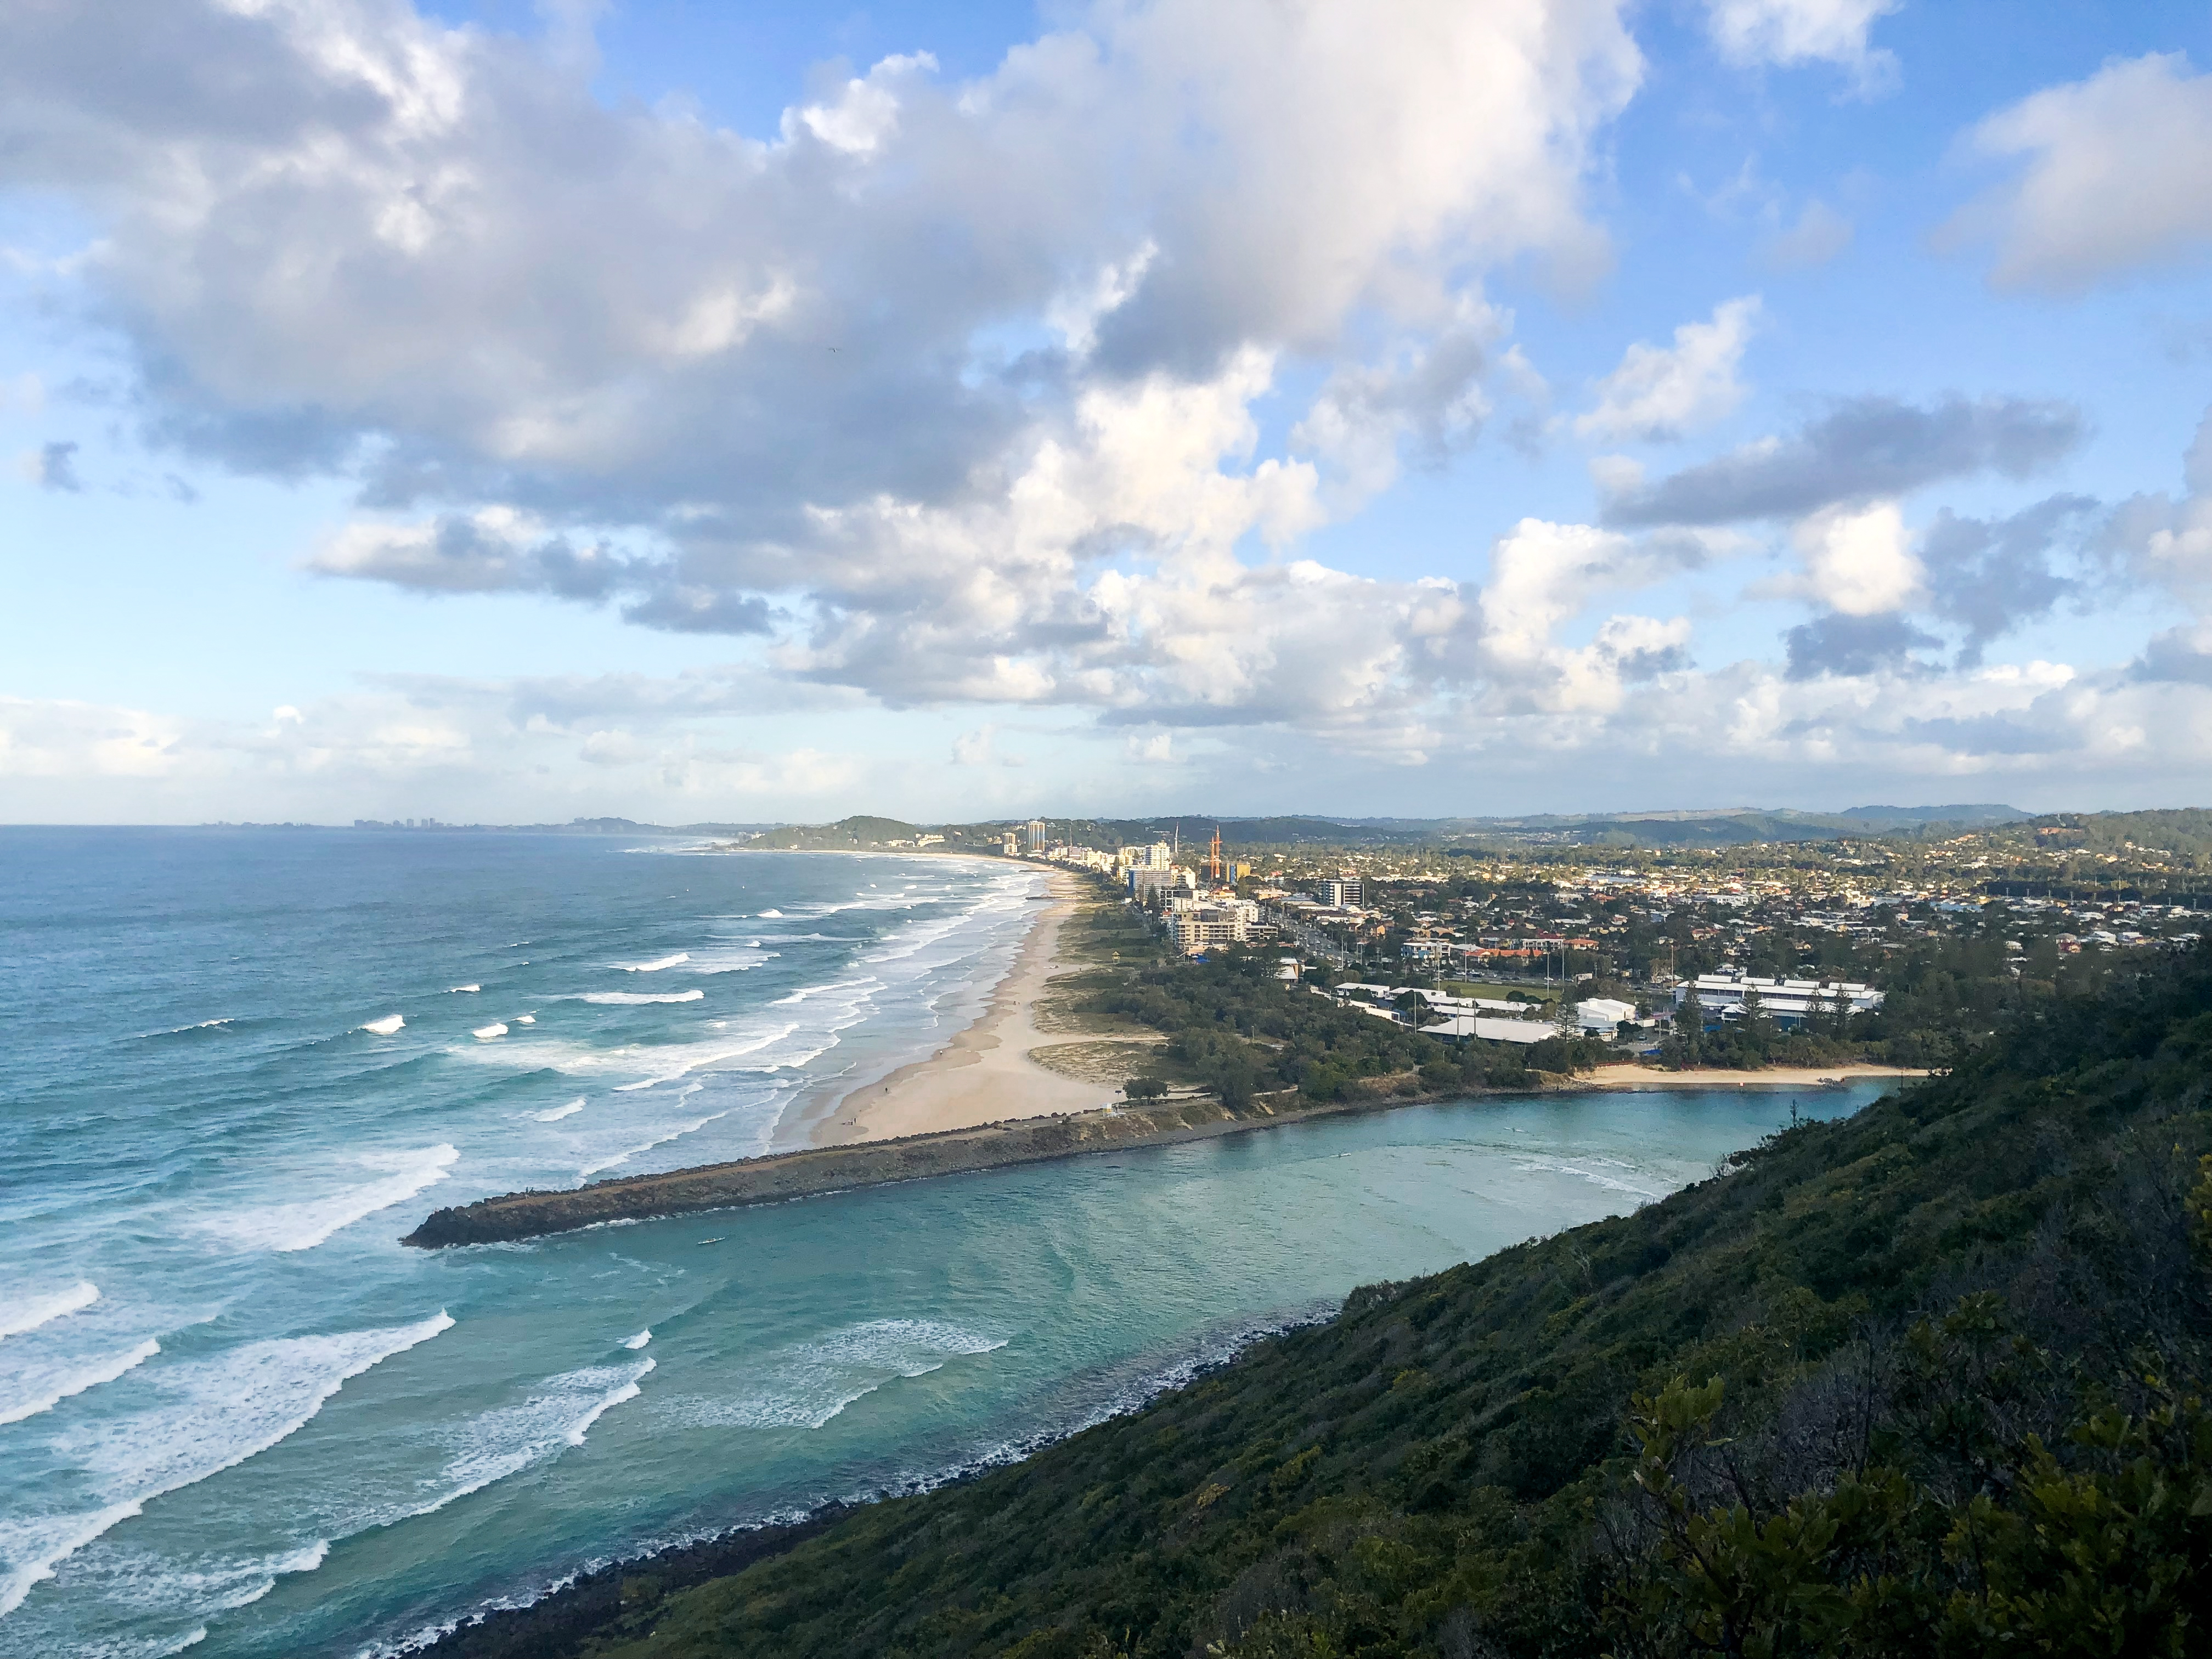 You HAVE to see the gorgeous view from Burleigh - definitely one of the Top 4 Day Trips From Brisbane